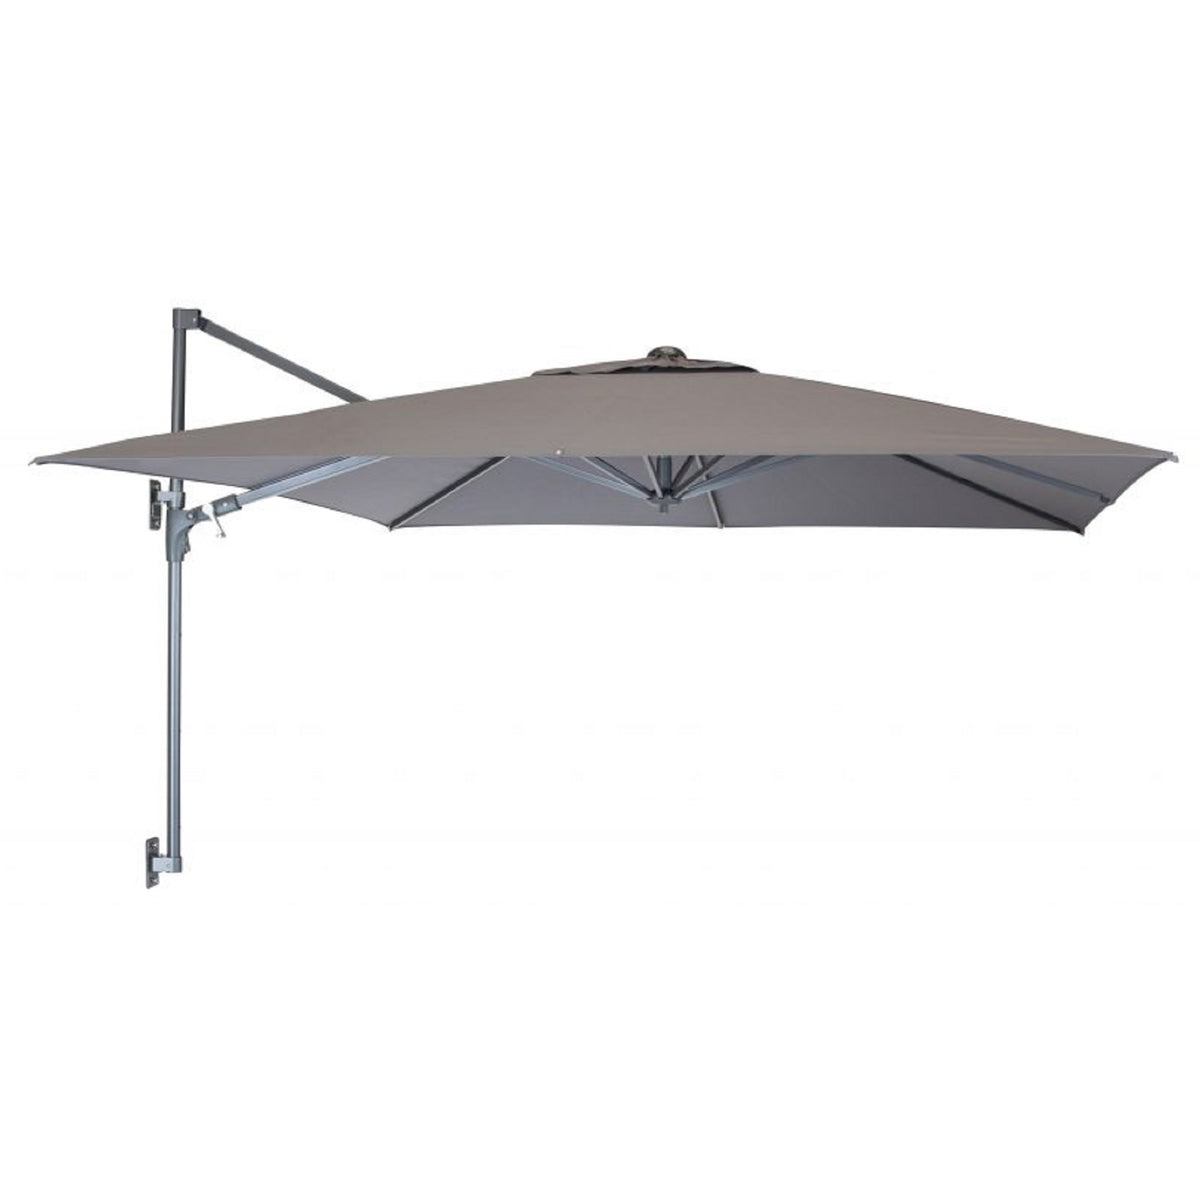 Kettler 2.5m Square Taupe Wall Mounted Free Arm Parasol